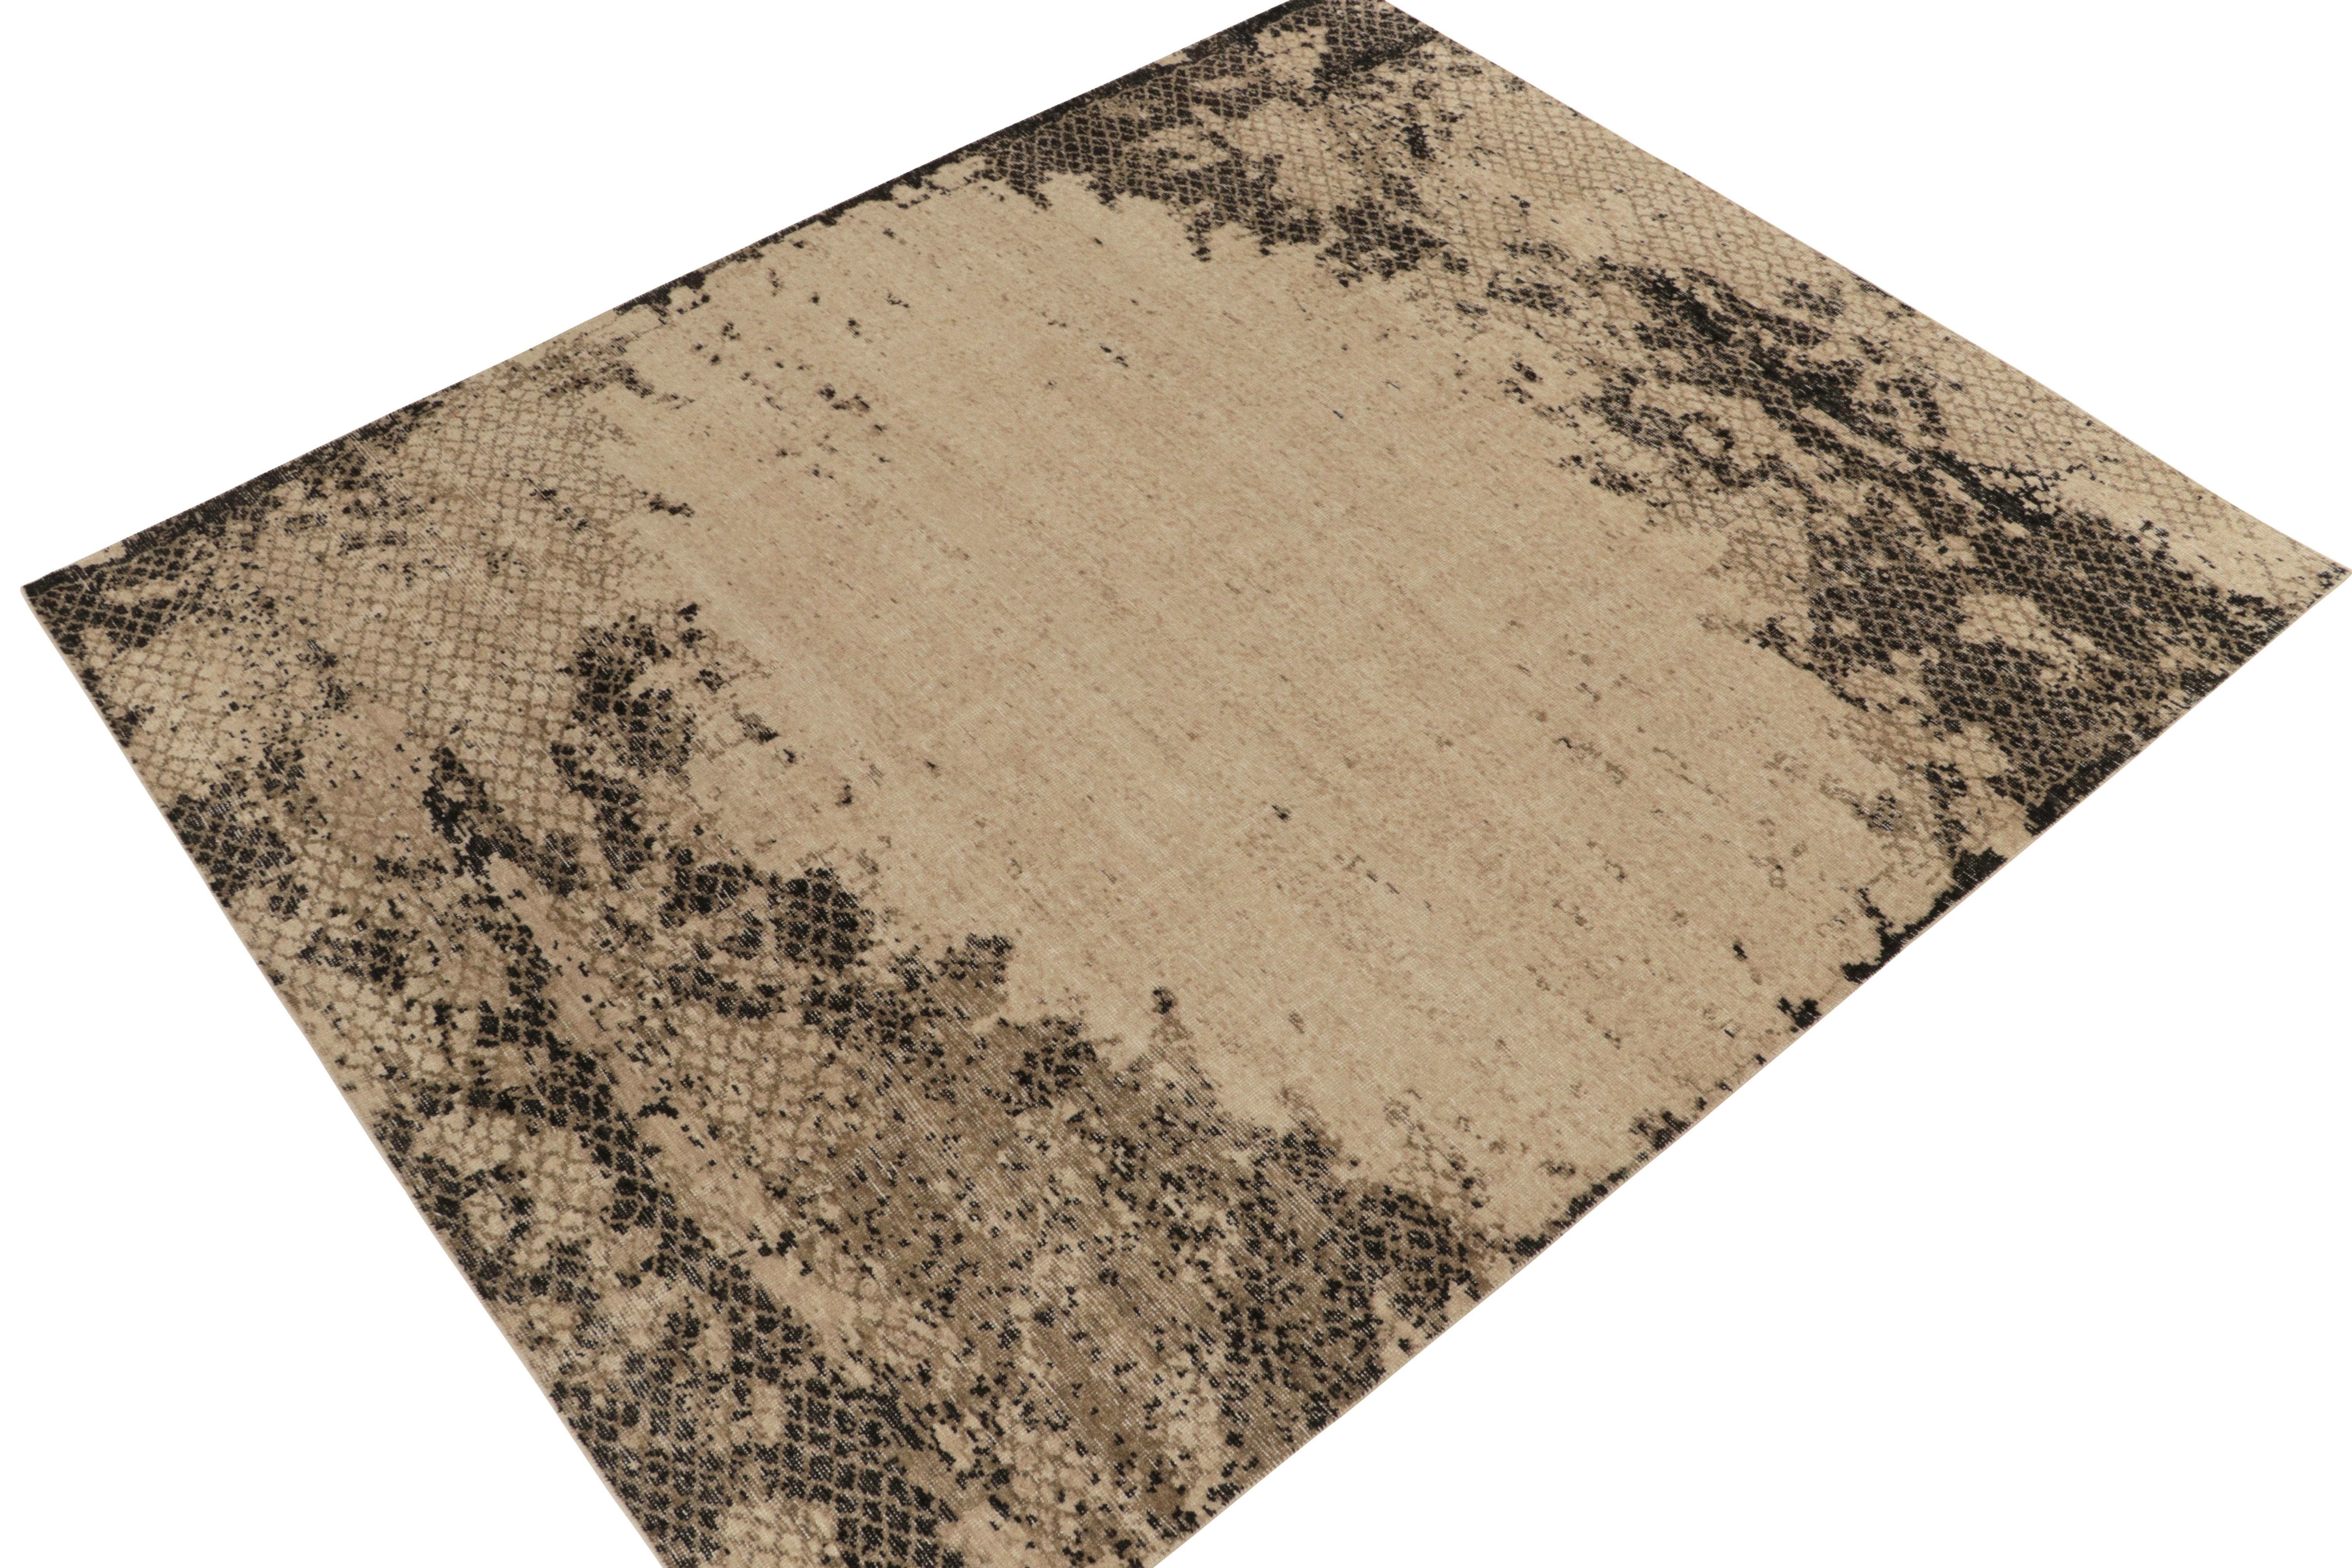 A scintillating 8 x 10 hand-knotted wool rug from Rug & Kilim’s Homage Collection—a smart encyclopedia of patterns and iconic aesthetics. This creation is inspired by abstract rugs with a more bold use of negative space in beige-brown and black,